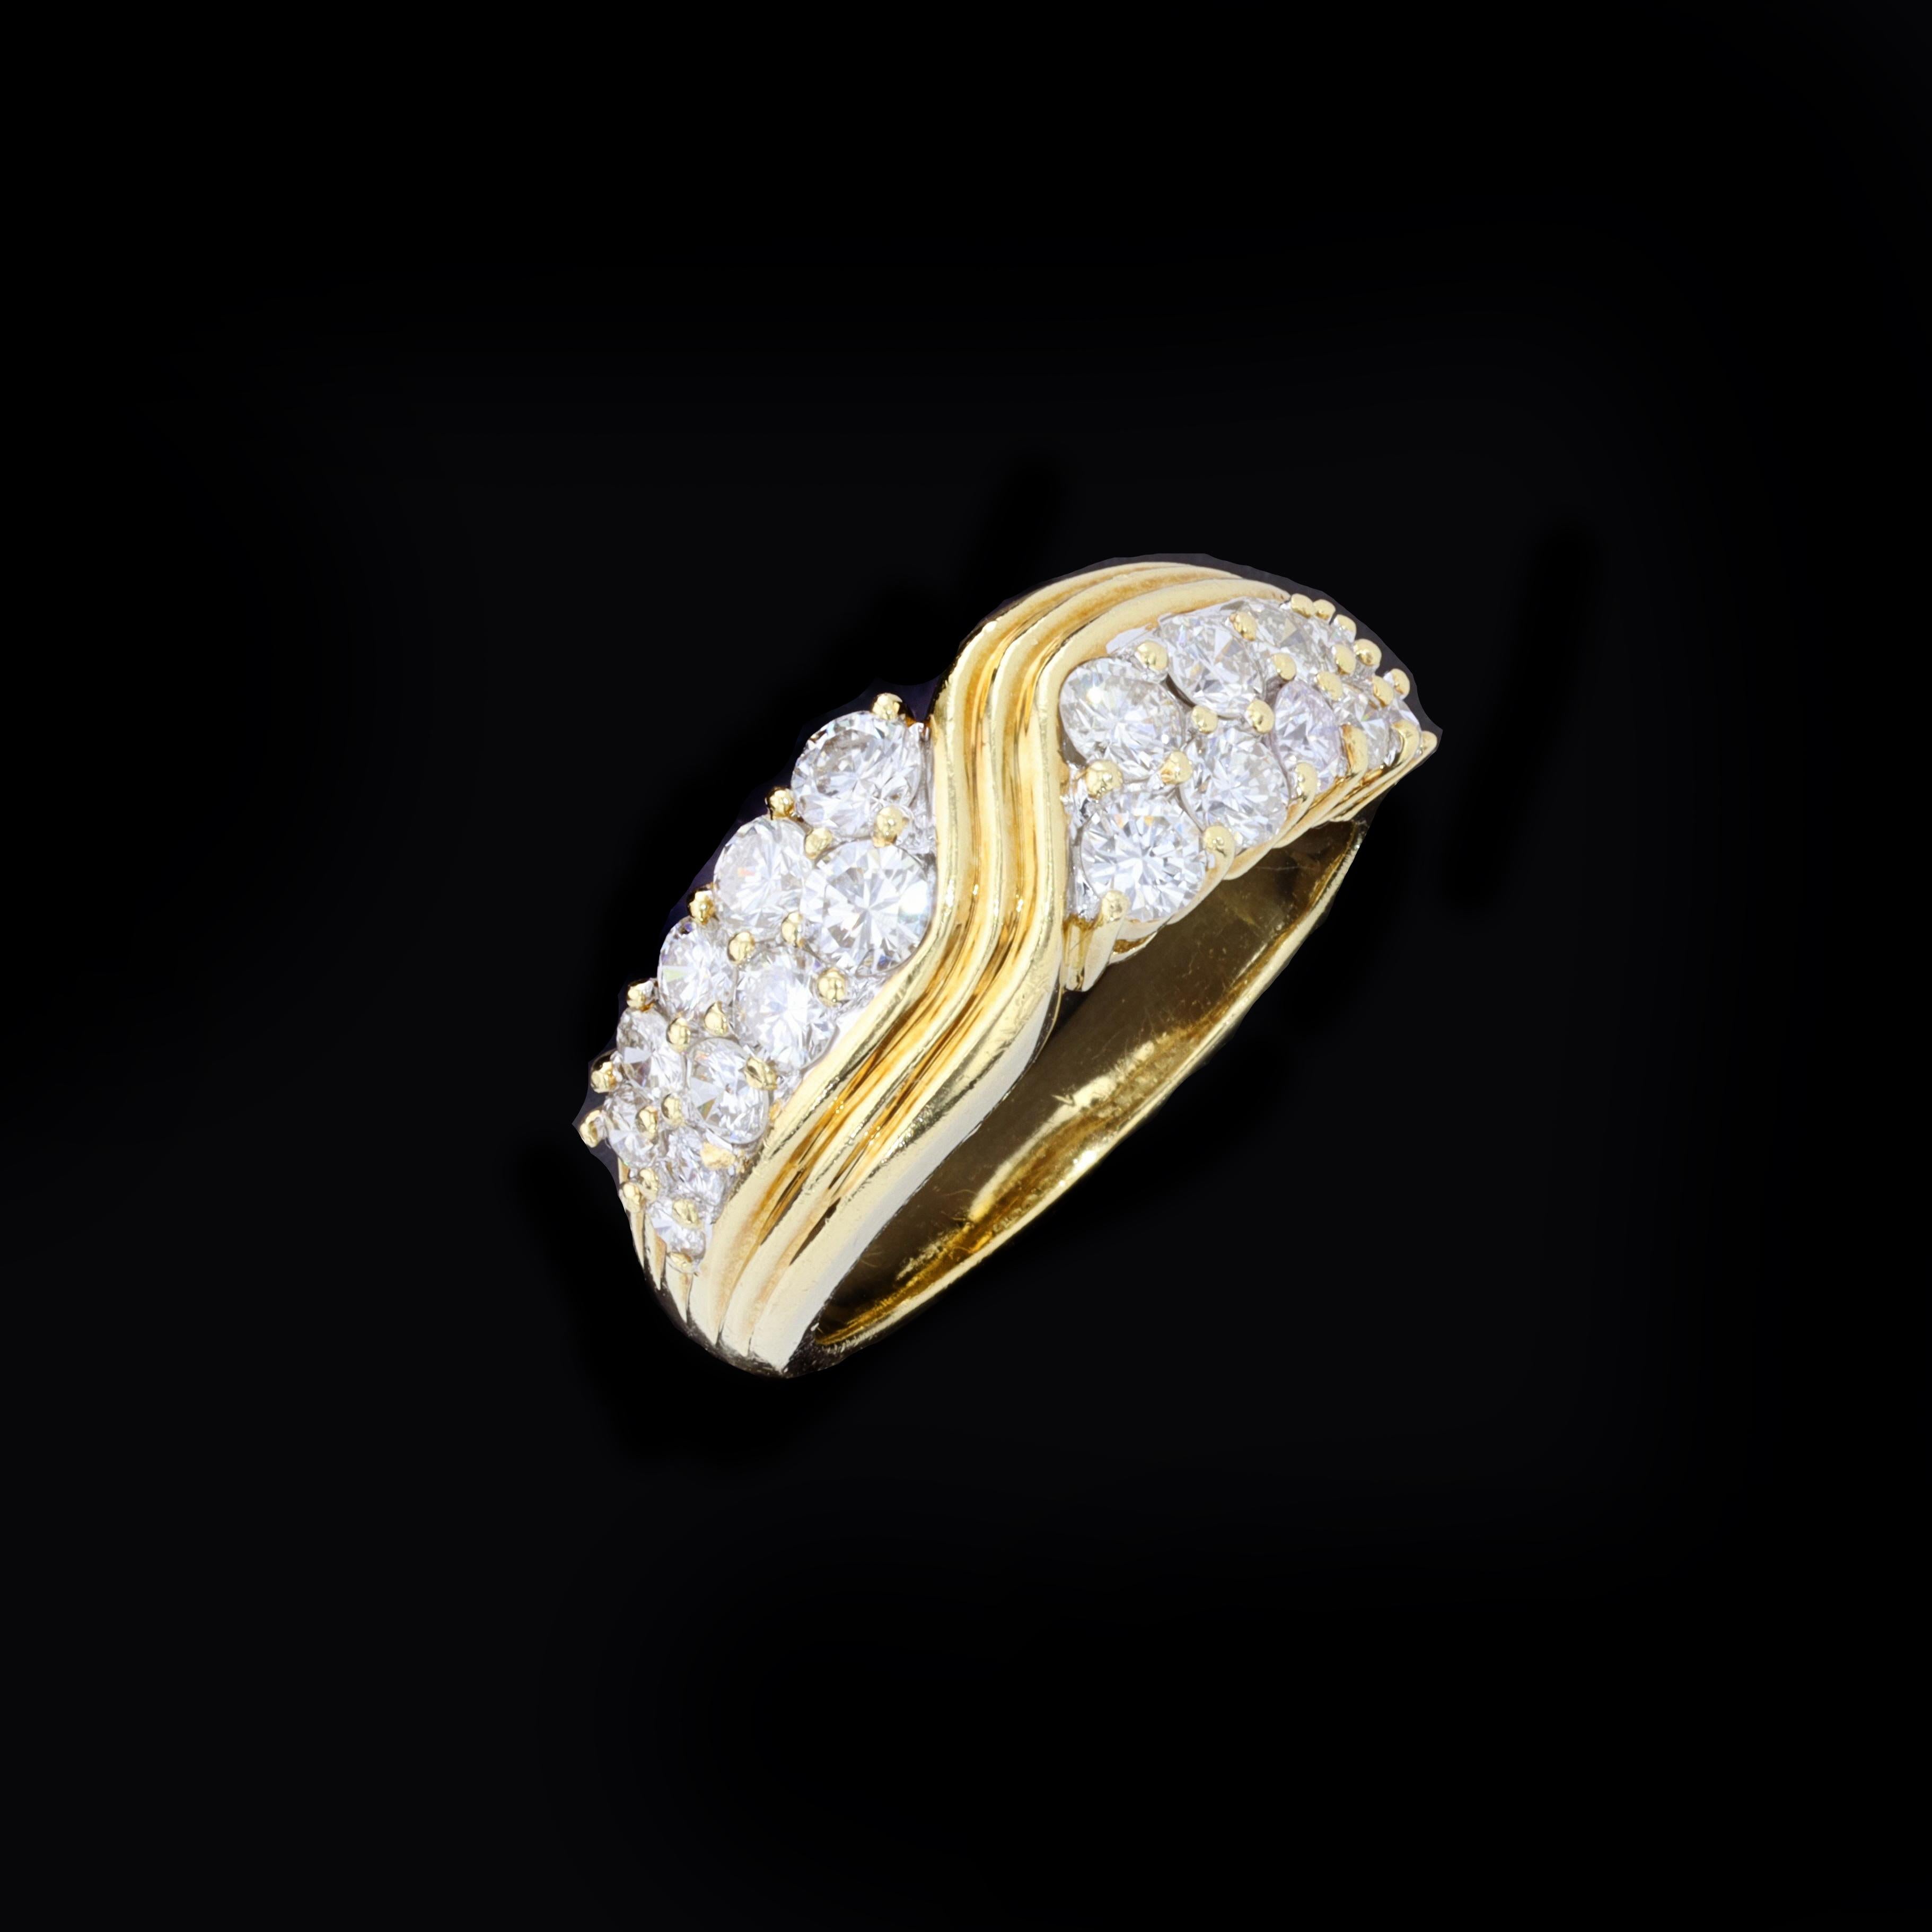 A radiant river of 18K yellow gold flows through the sparkle of icy round diamonds in this retro ring. This ring features 20 round F VS1 diamonds weighing 1.50 ctw, and is currently sized to 7.

